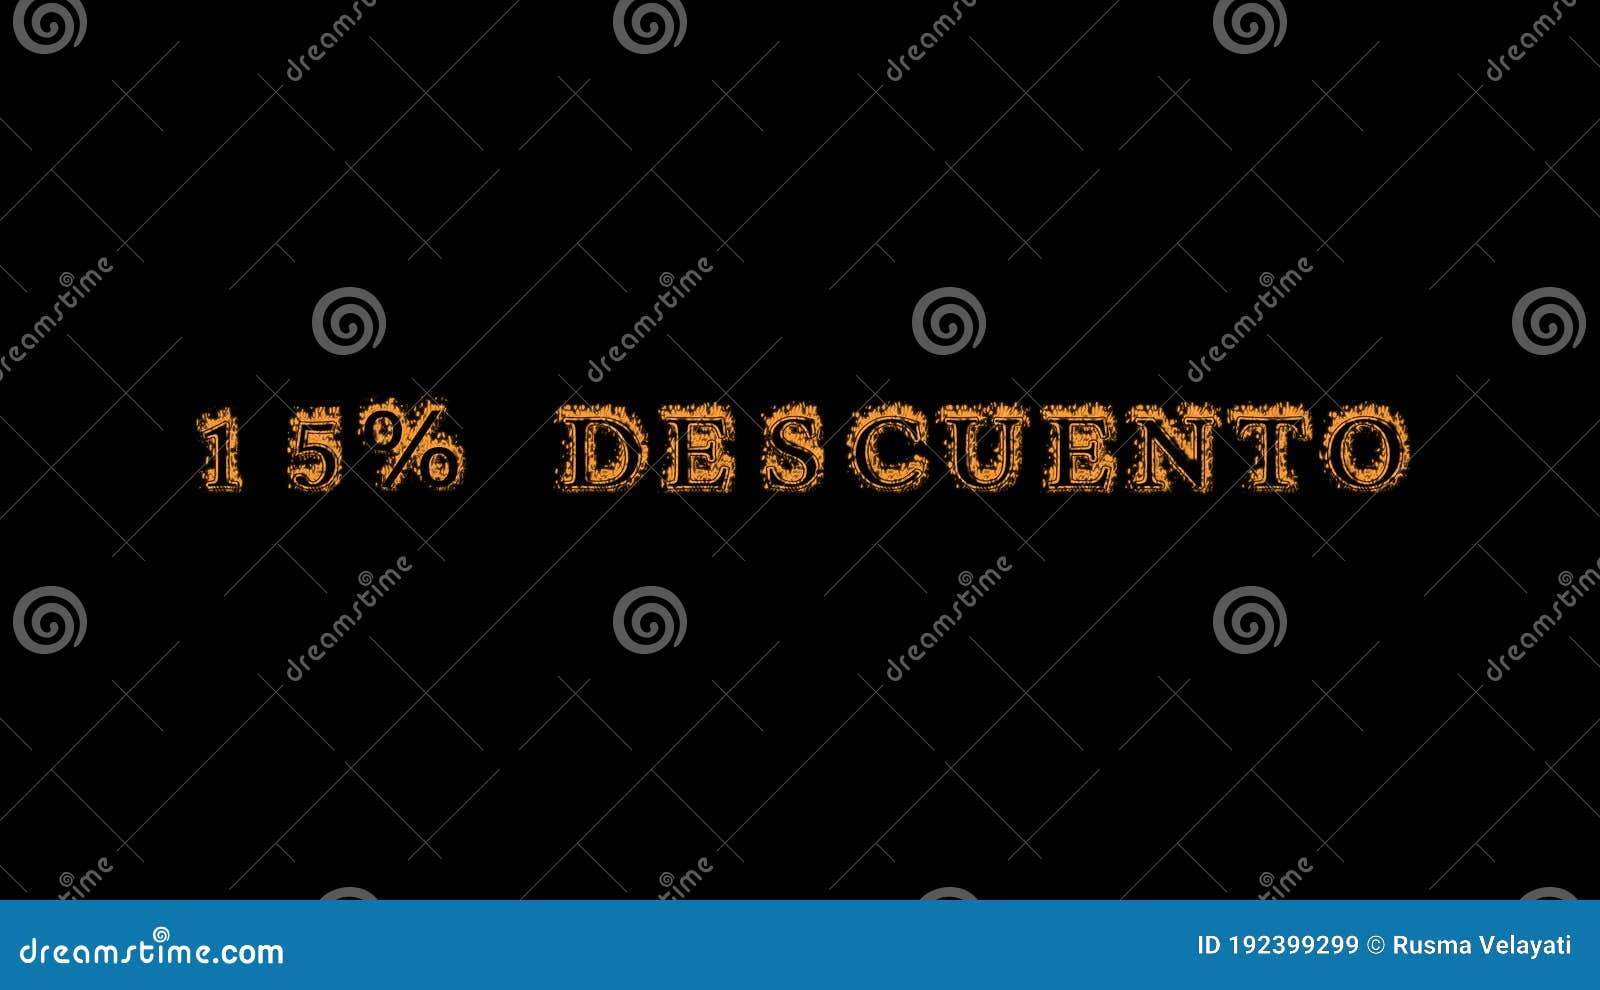 15% descuento fire text effect black background